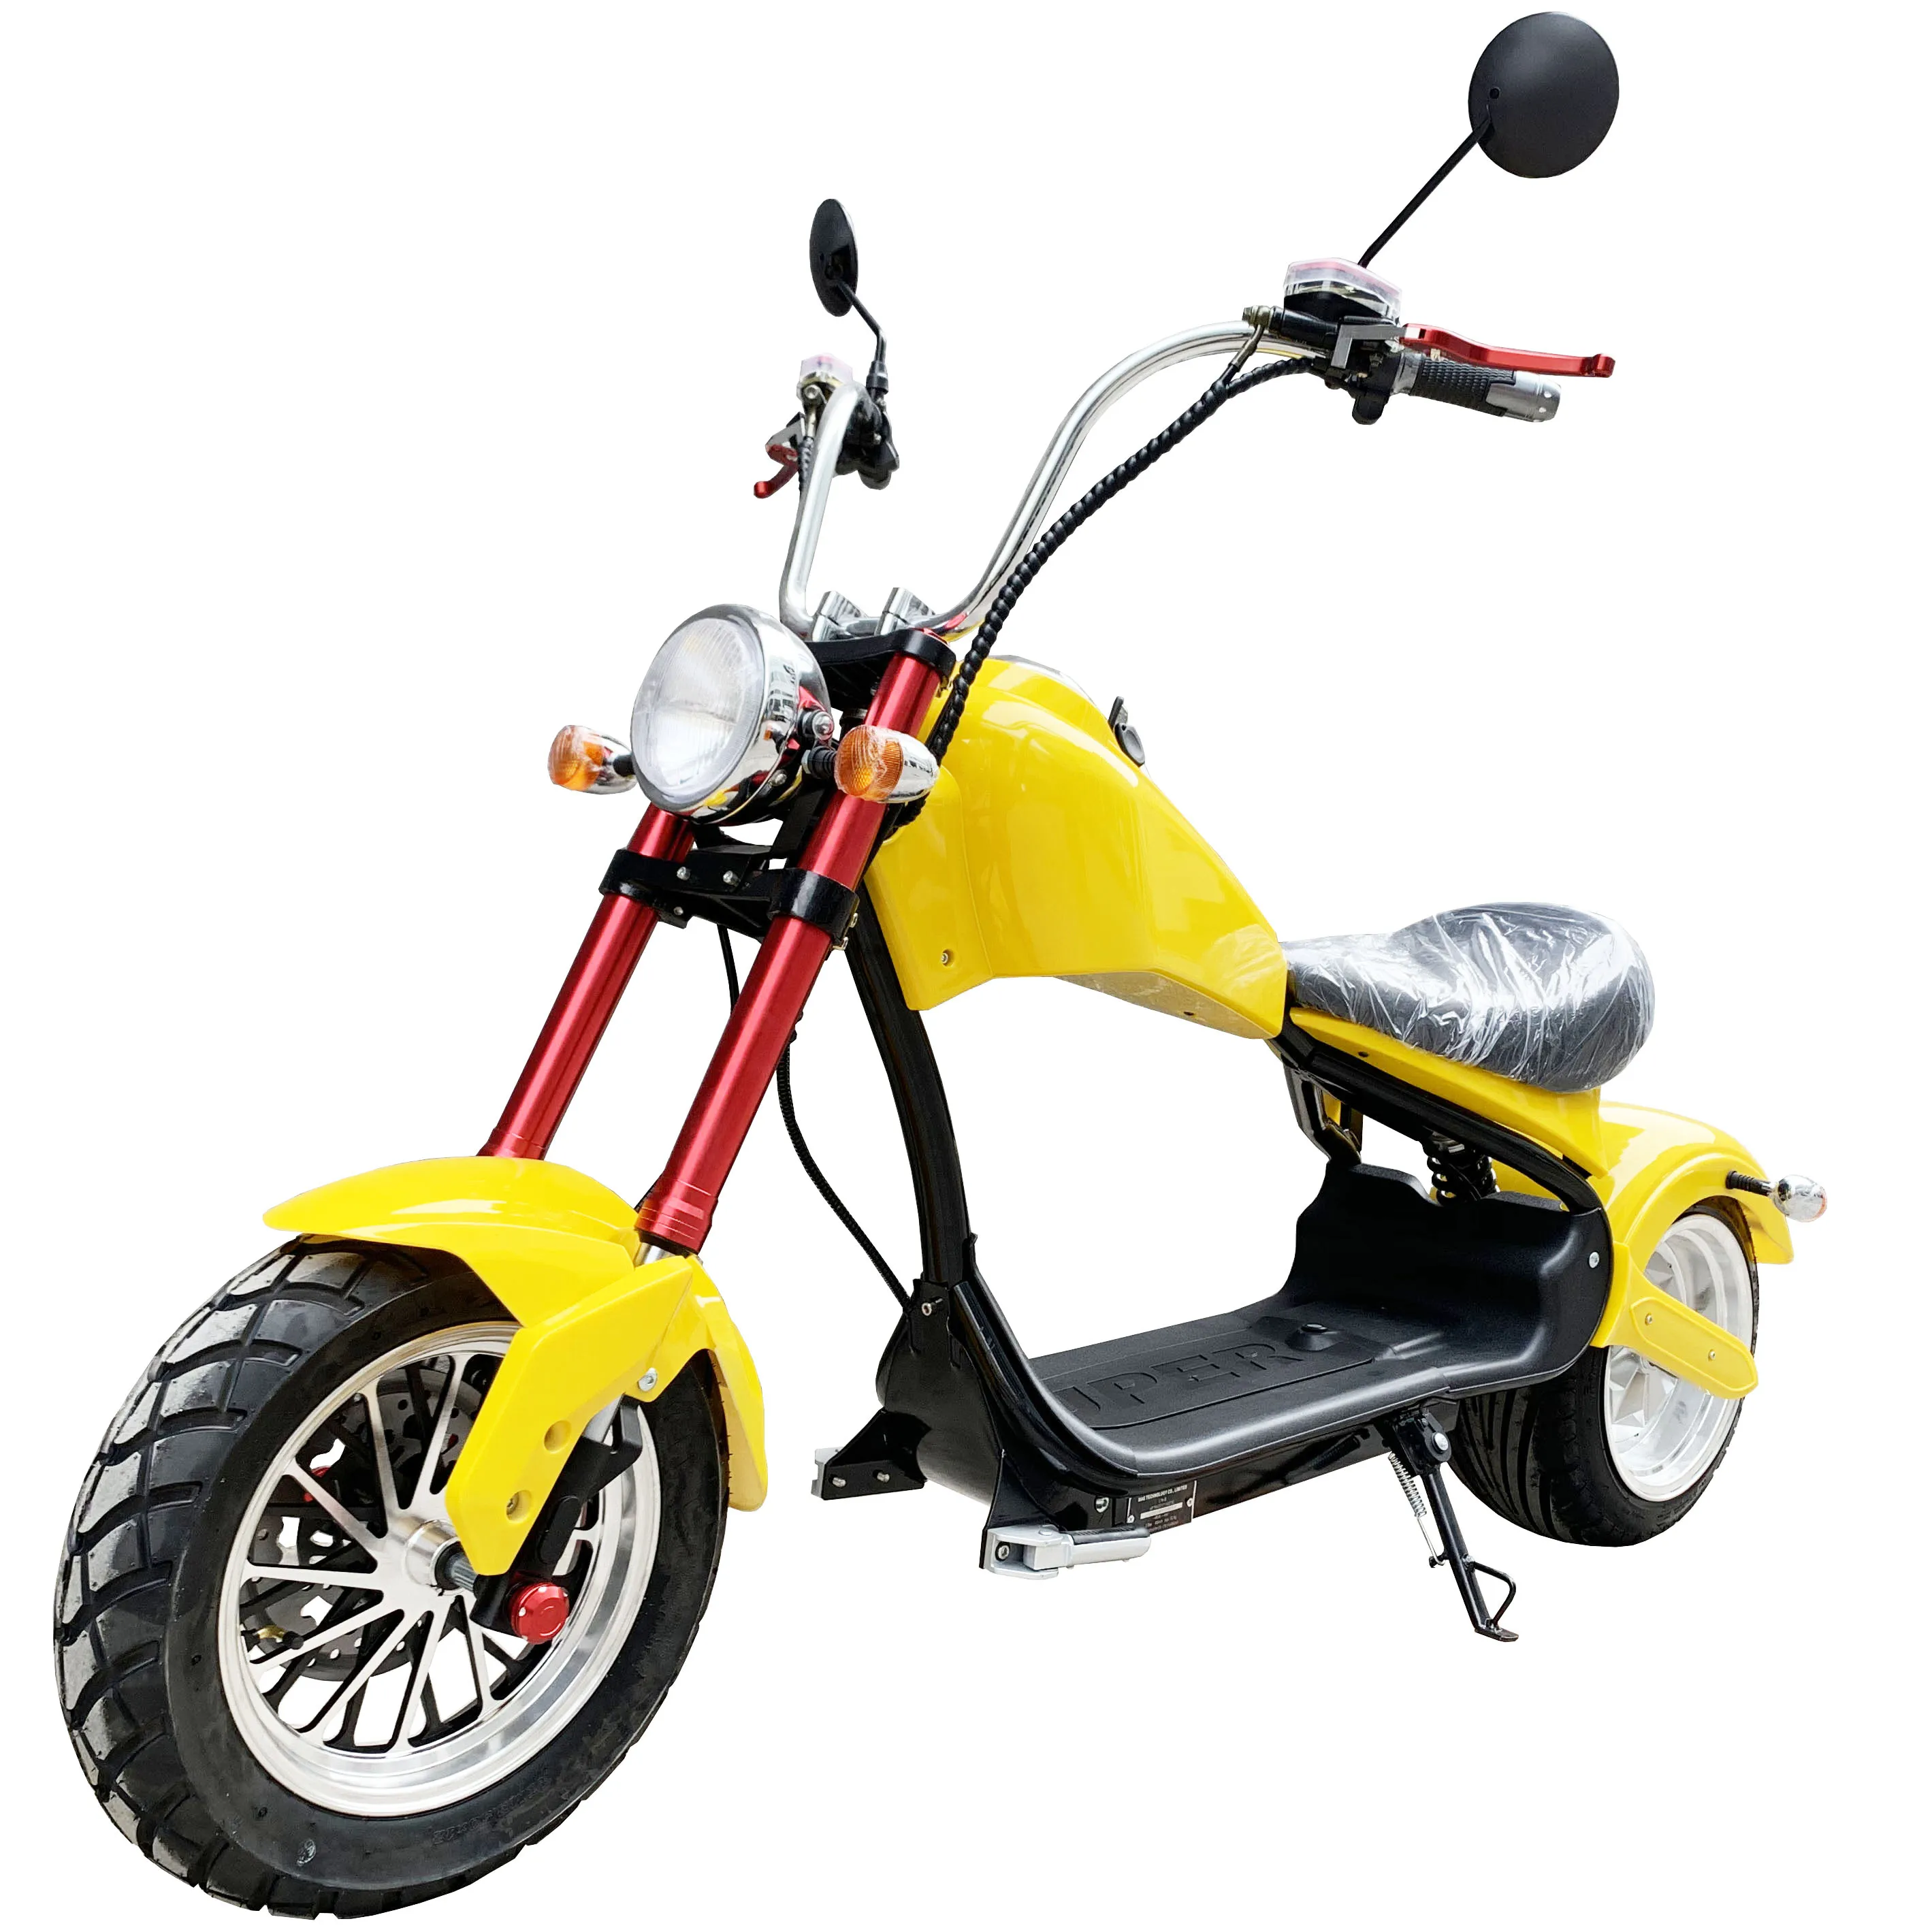 

X12 GERMANY STOCK 1000w 60v 12ah/20ah/40ah electric scooter paypal City coco scooter 1500w electric